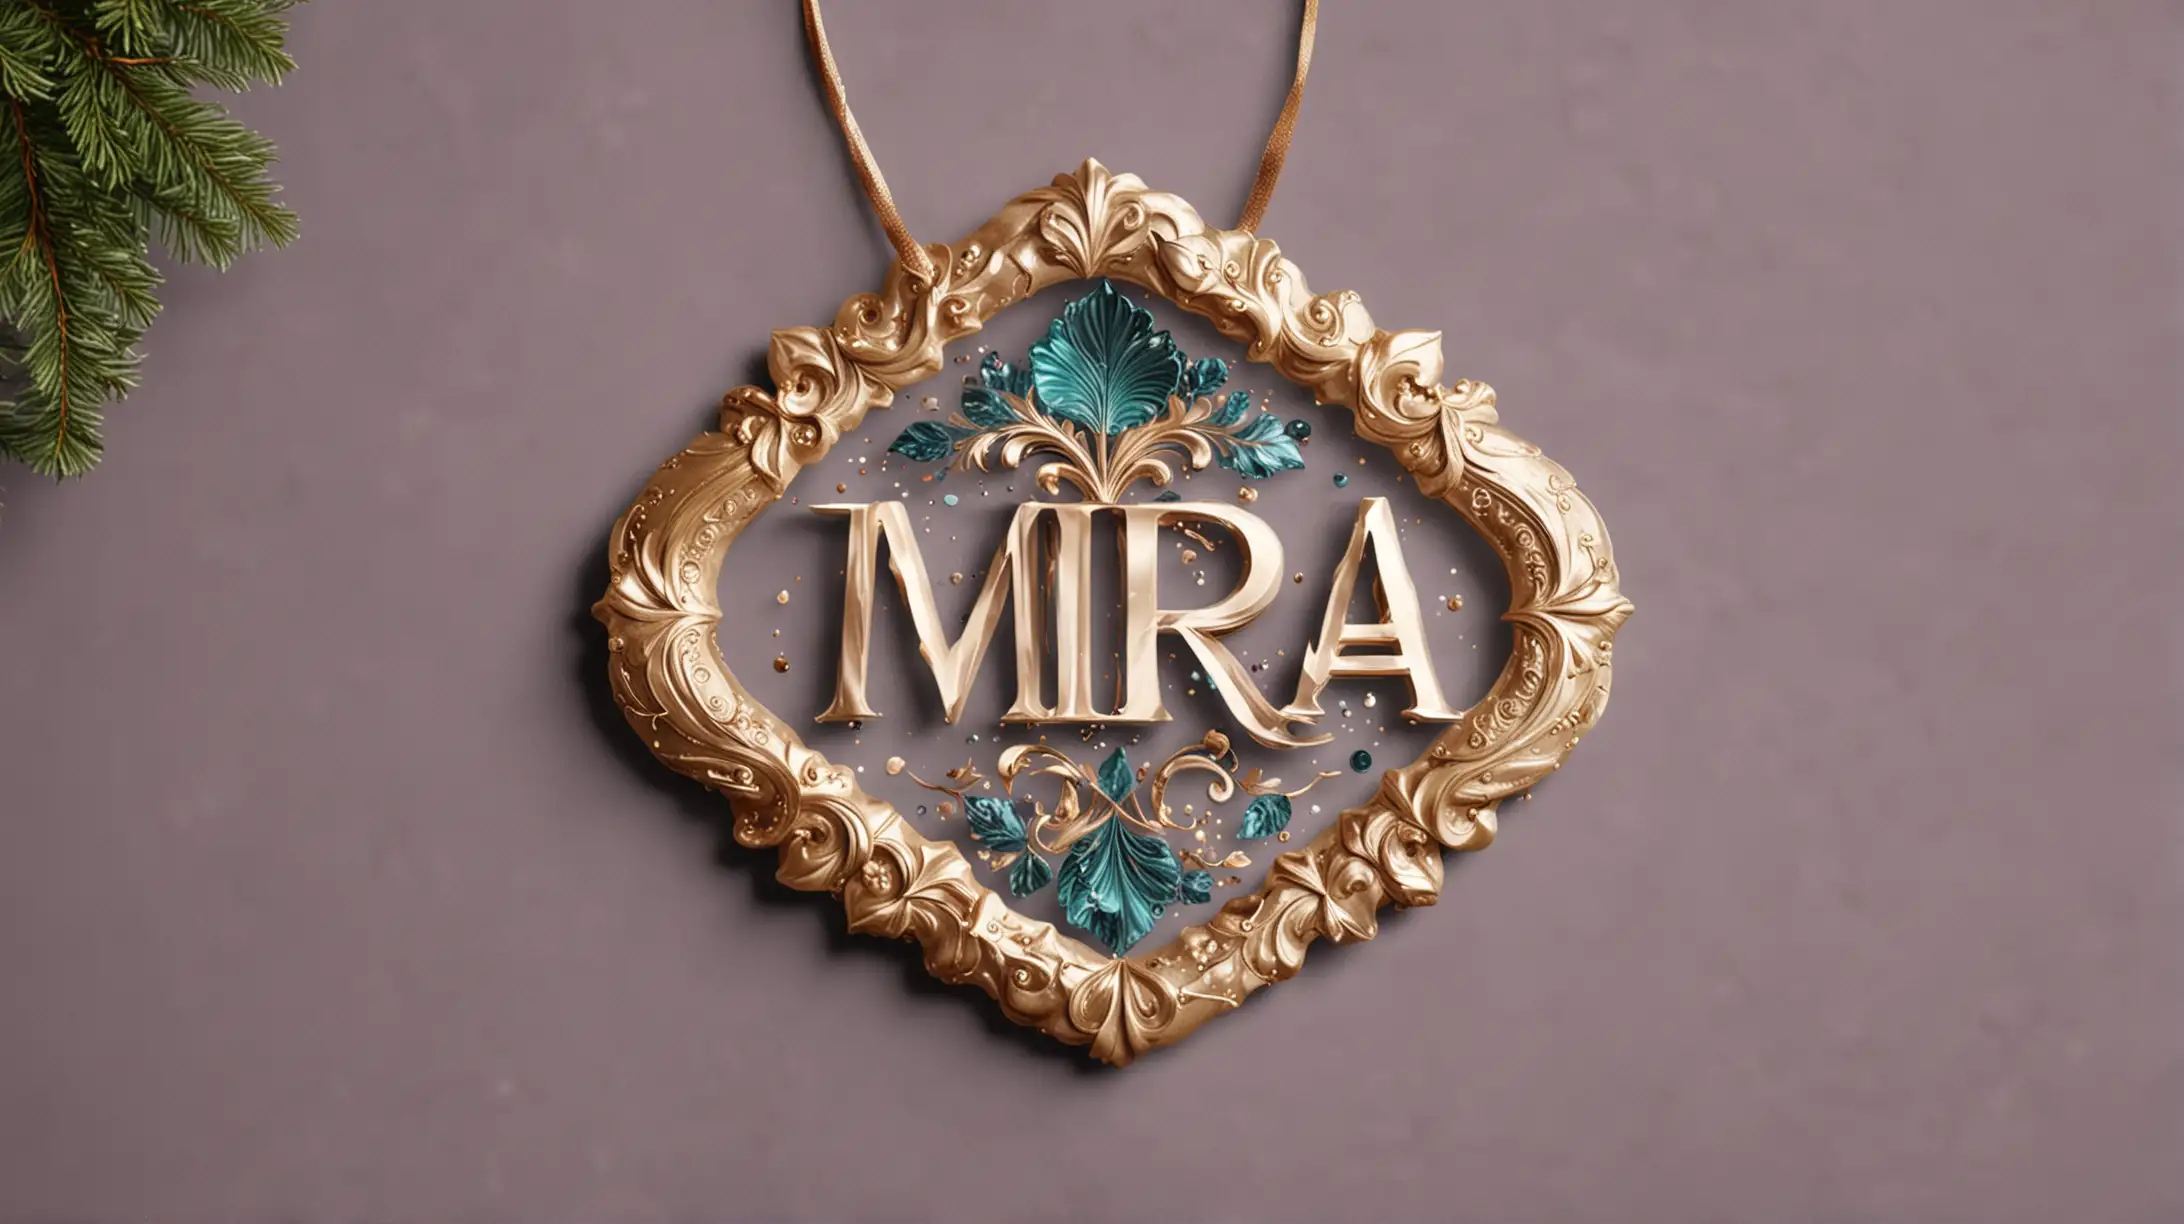 Generate a striking logo for 'MIRA Shop,' our 2024 online emporium specializing in resin ornaments. Infuse elements of resin craftsmanship and artistic expression, reflecting elegance and timeless beauty.